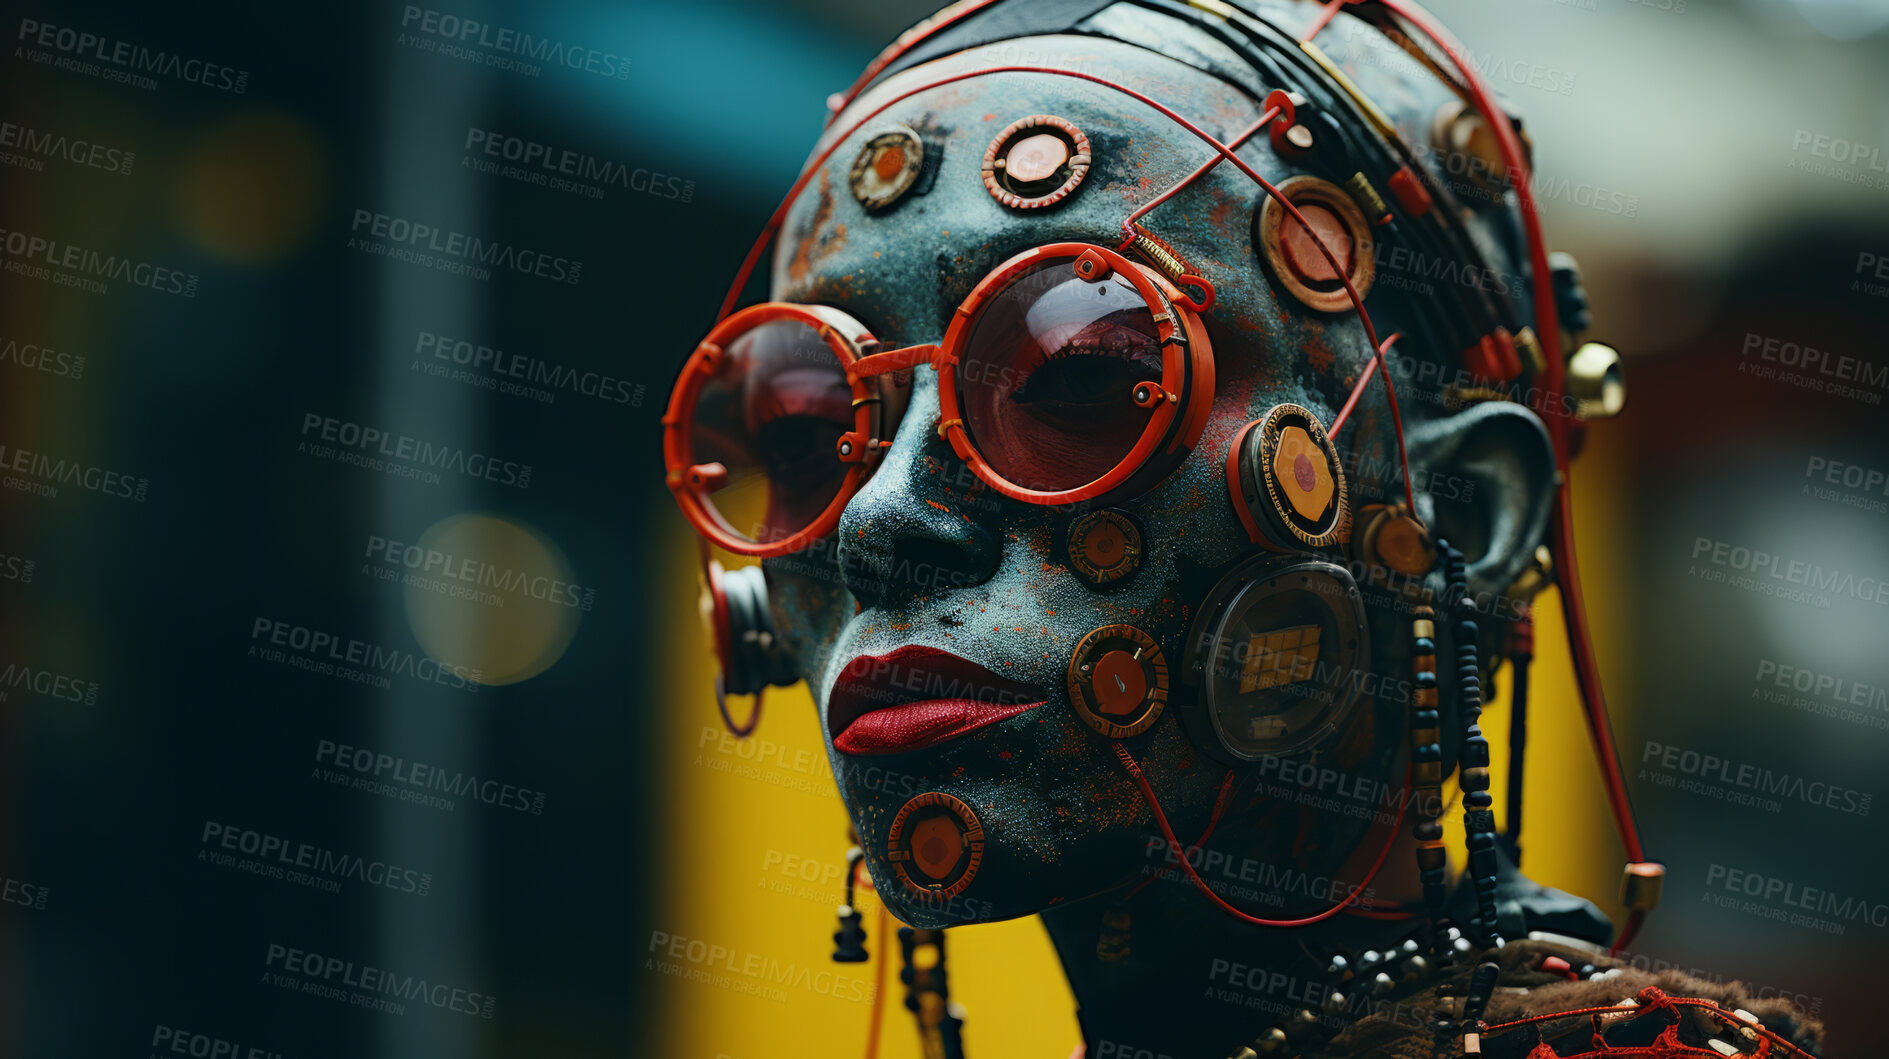 Buy stock photo Futuristic android, robotic humanoid. Human face, Mechanical body, in dystopian Sci-fi city.